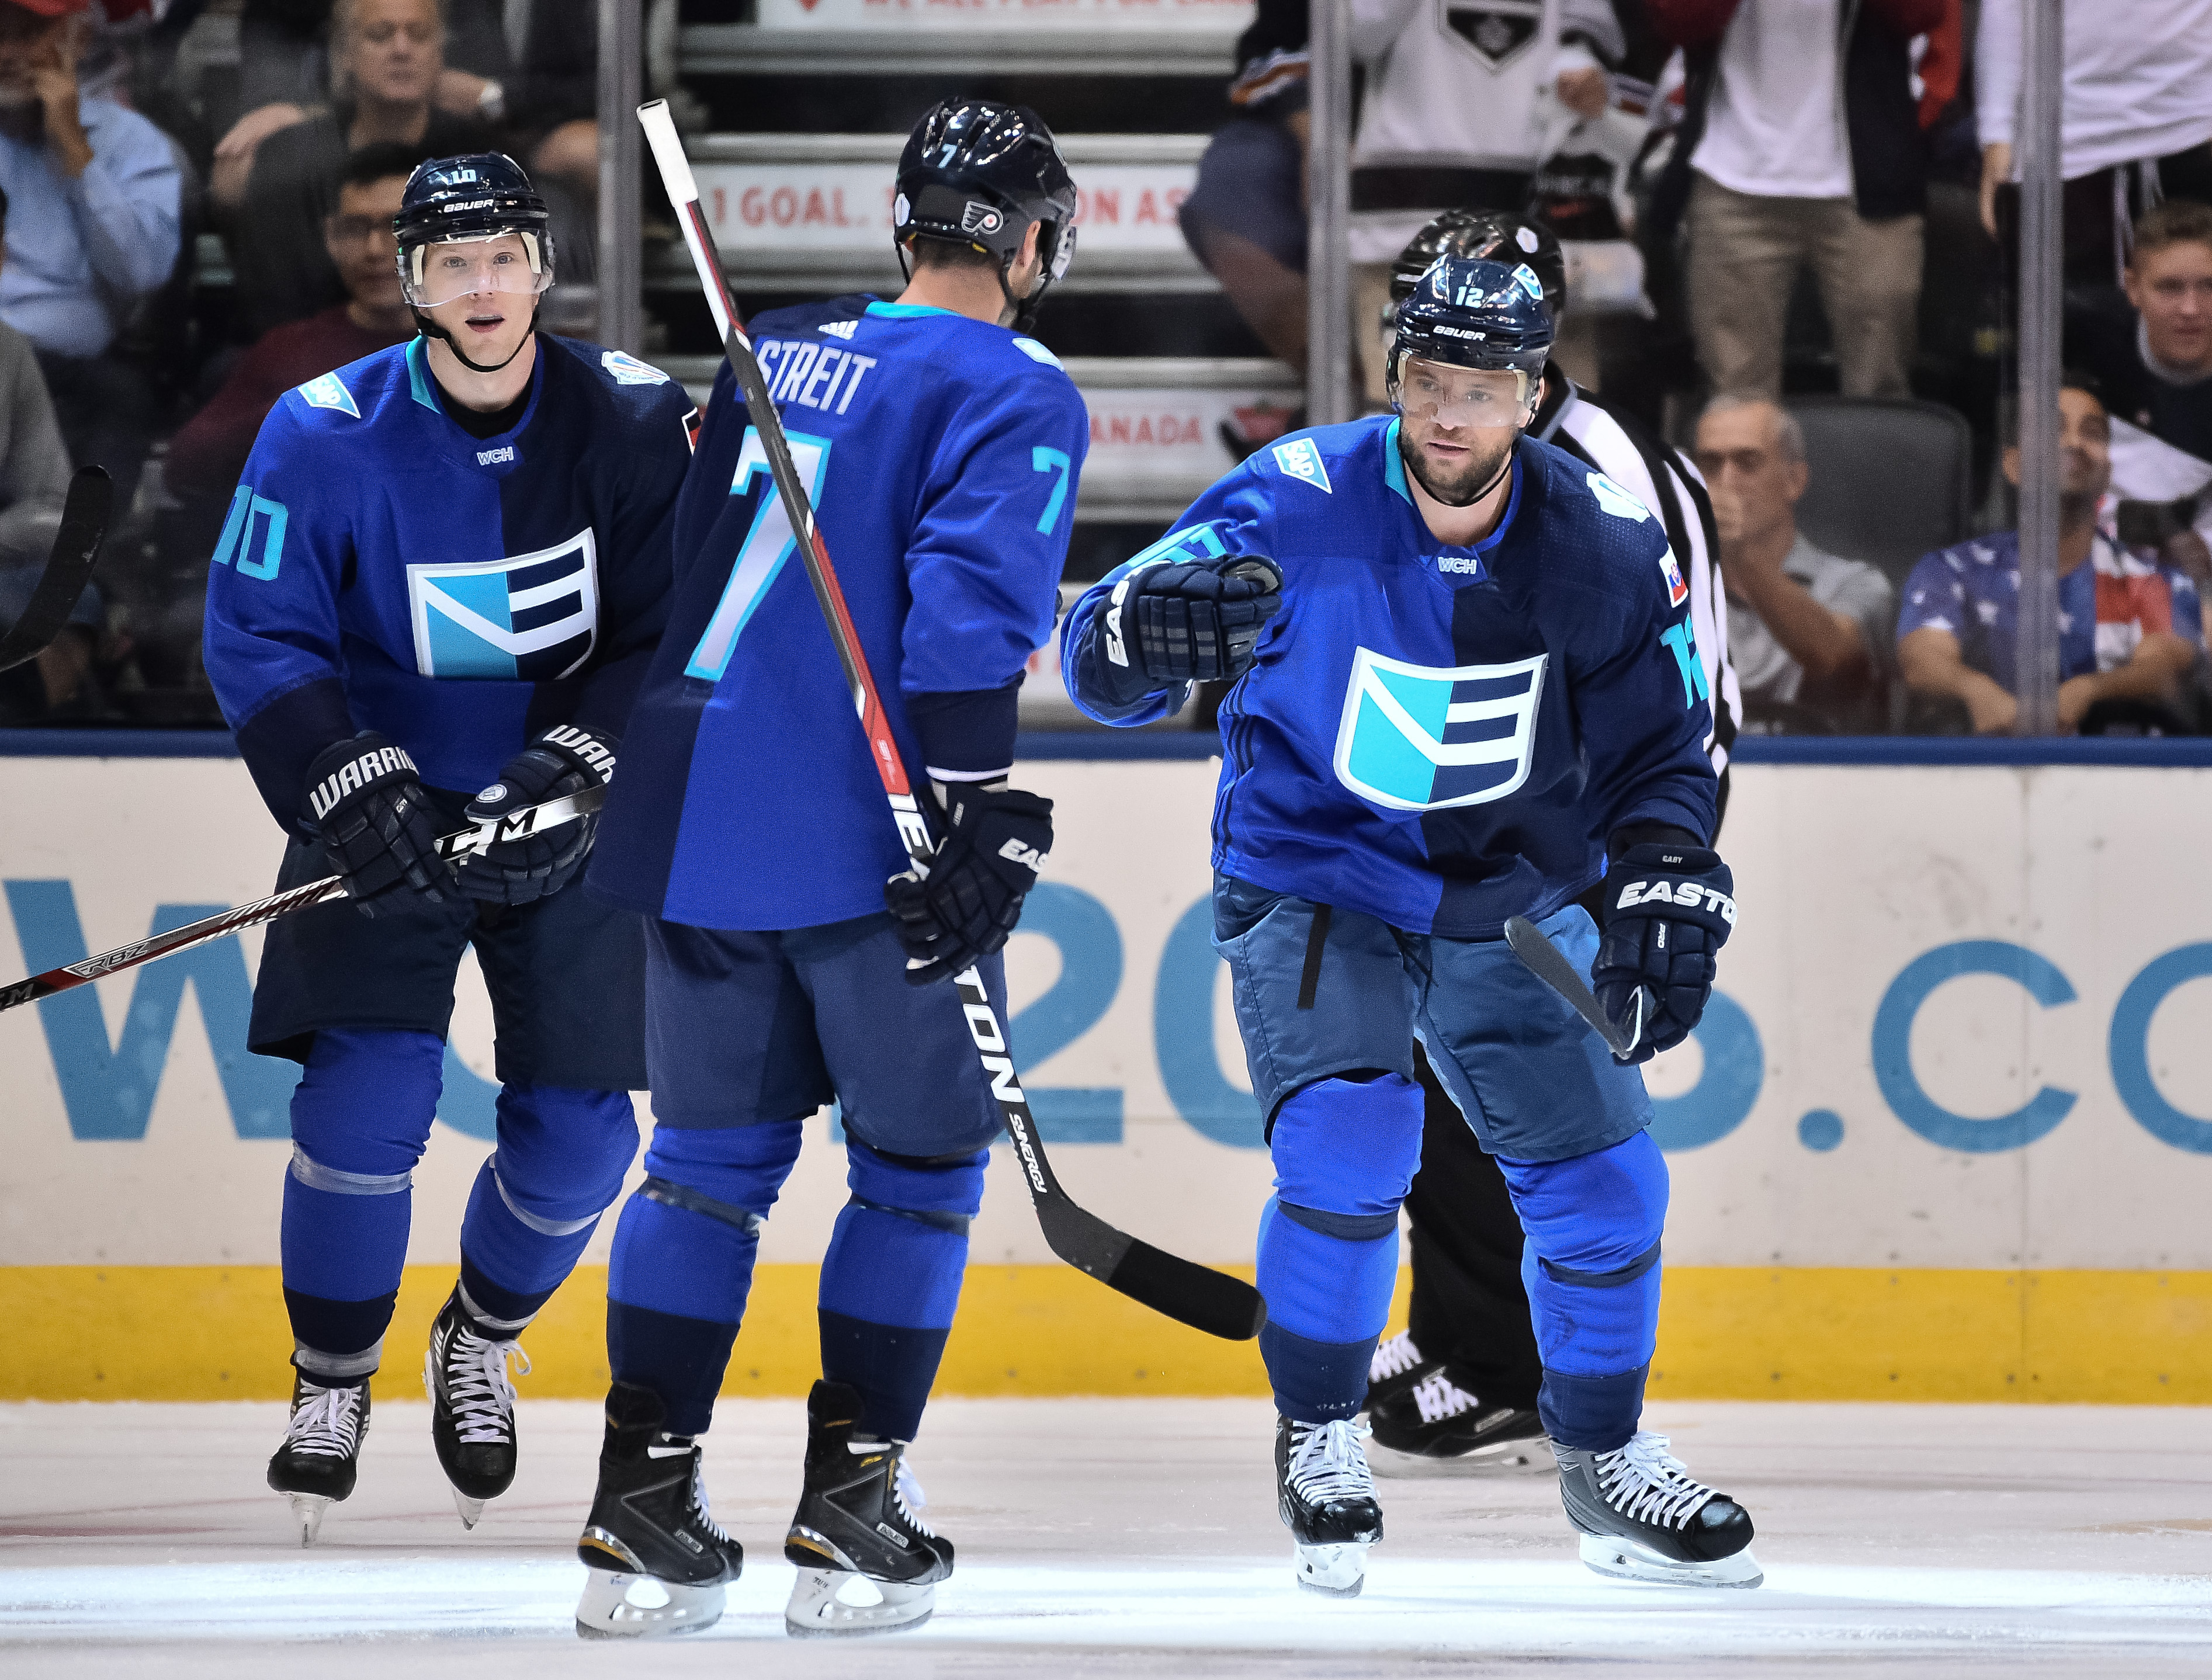 TEAM EUROPE NAMES ADDITIONS TO STAFF FOR WORLD CUP OF HOCKEY 2016